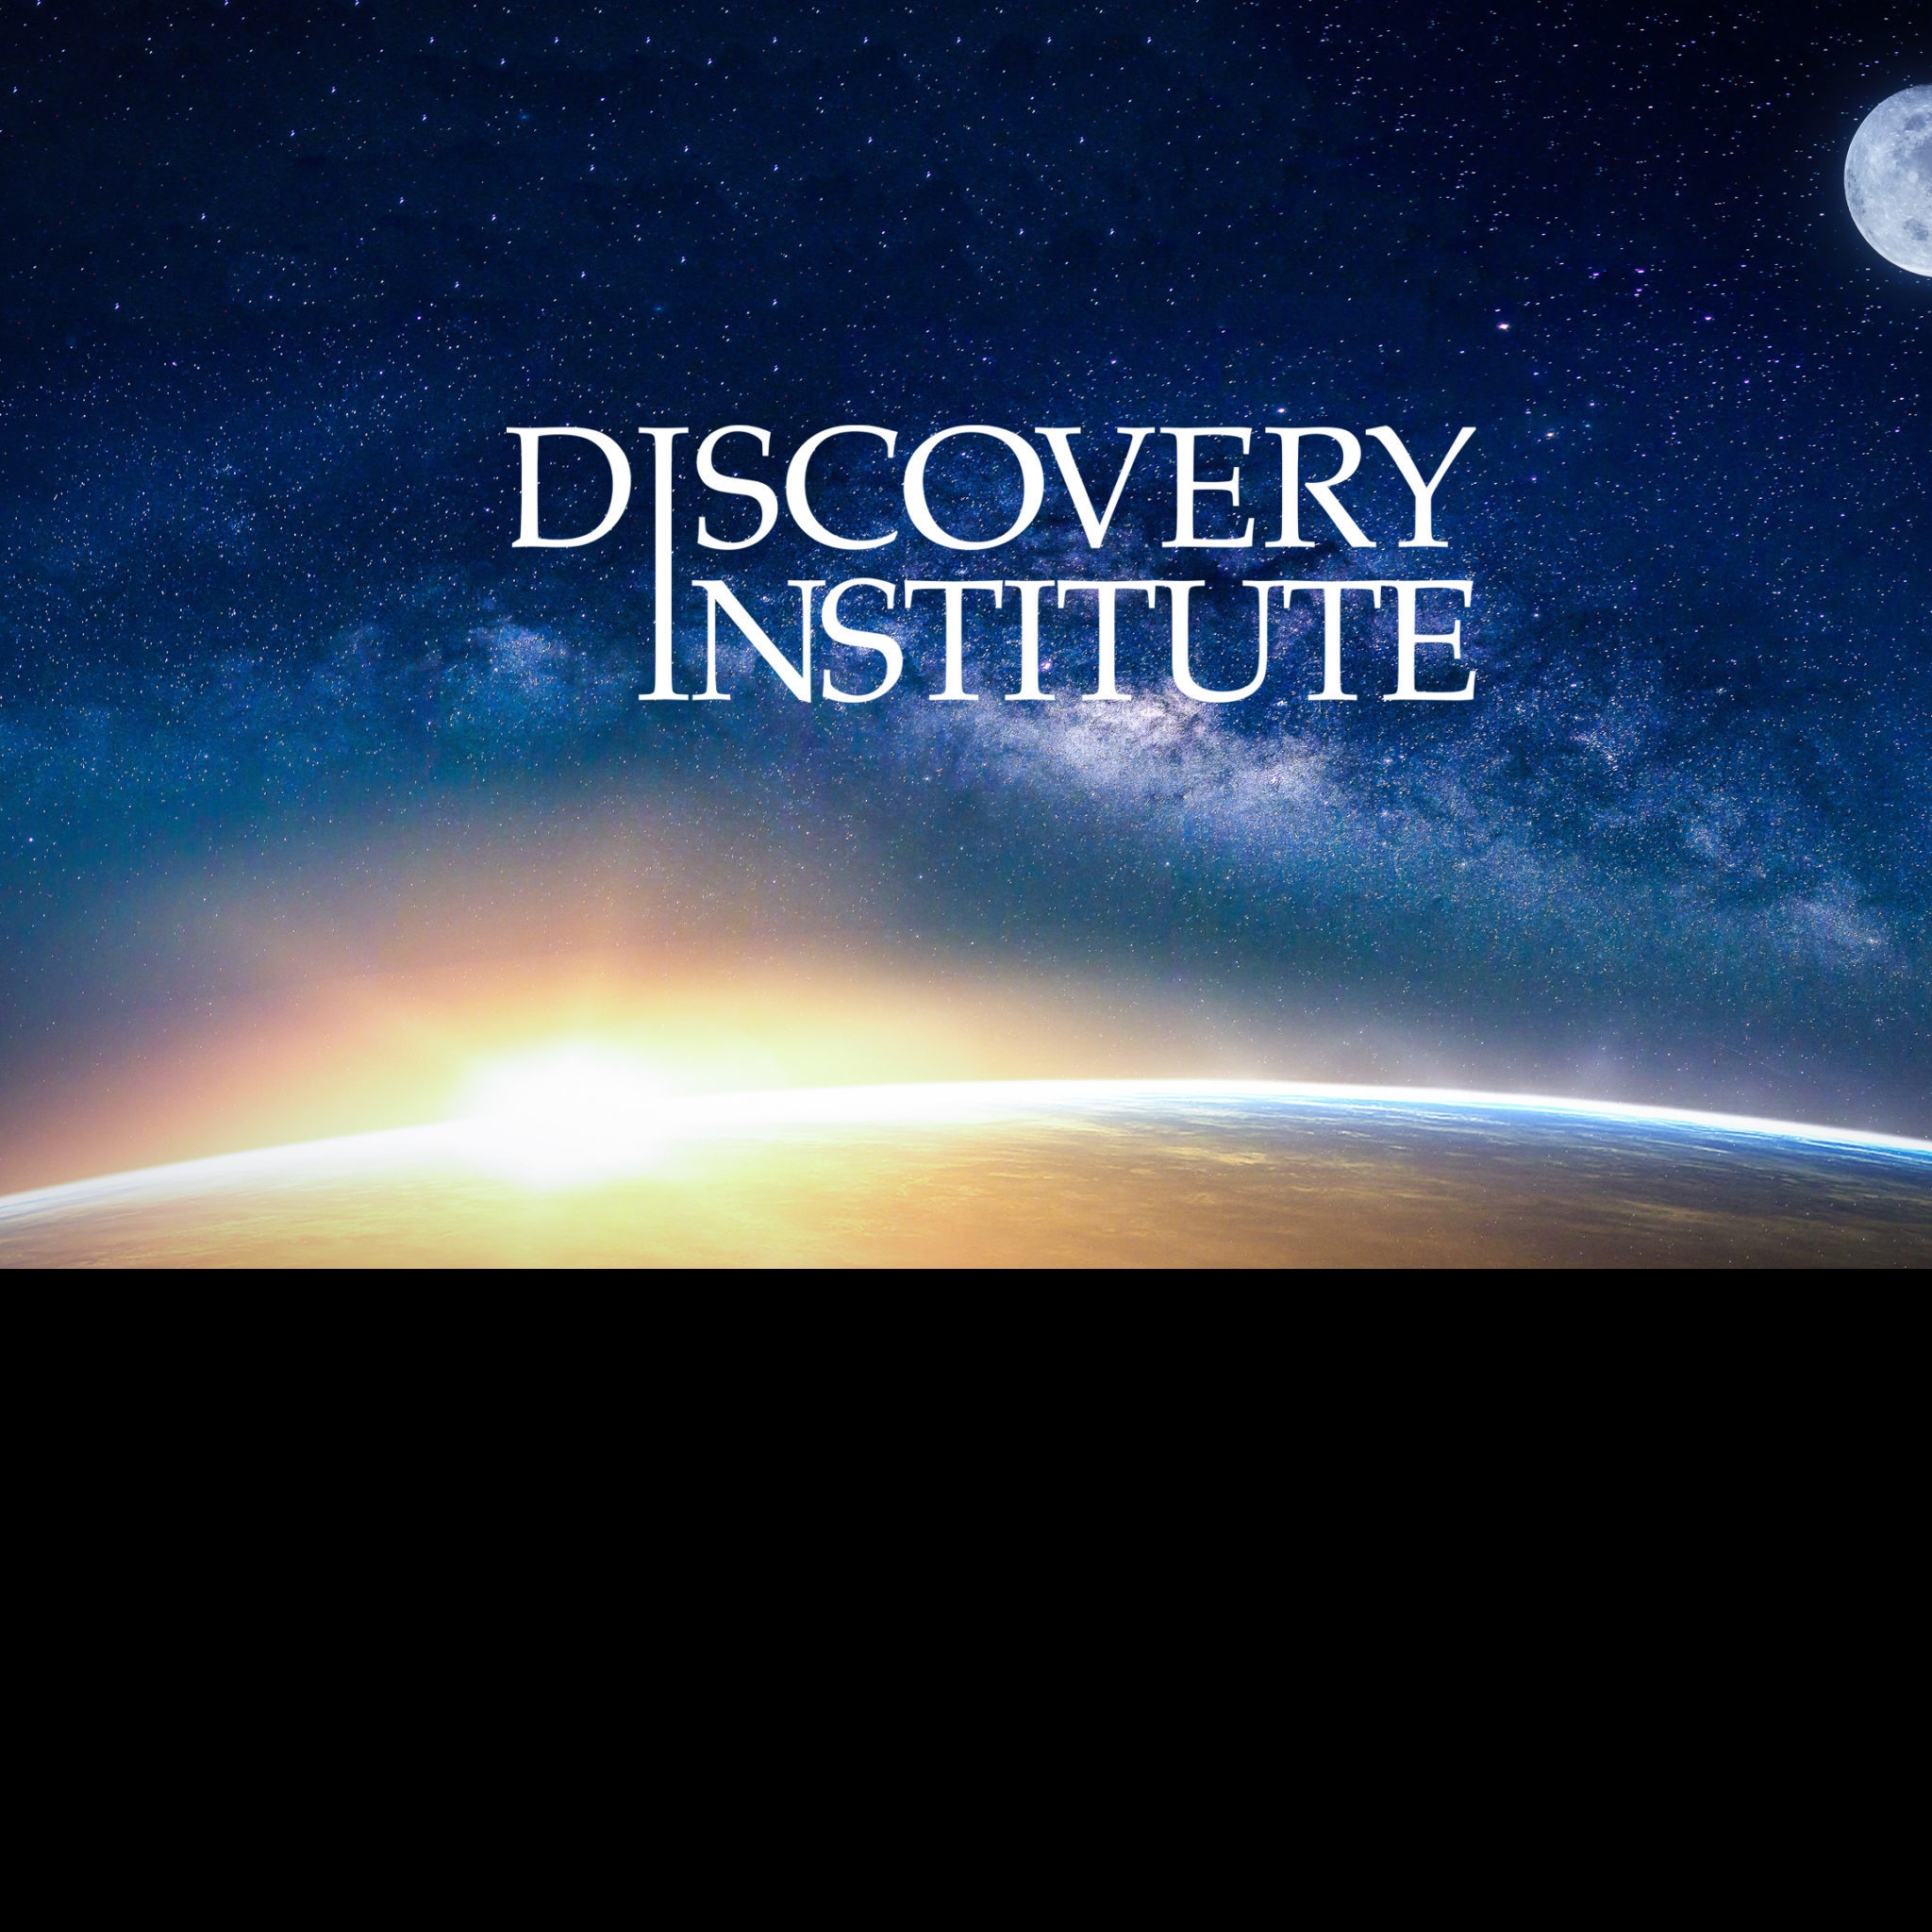 www.discovery.org